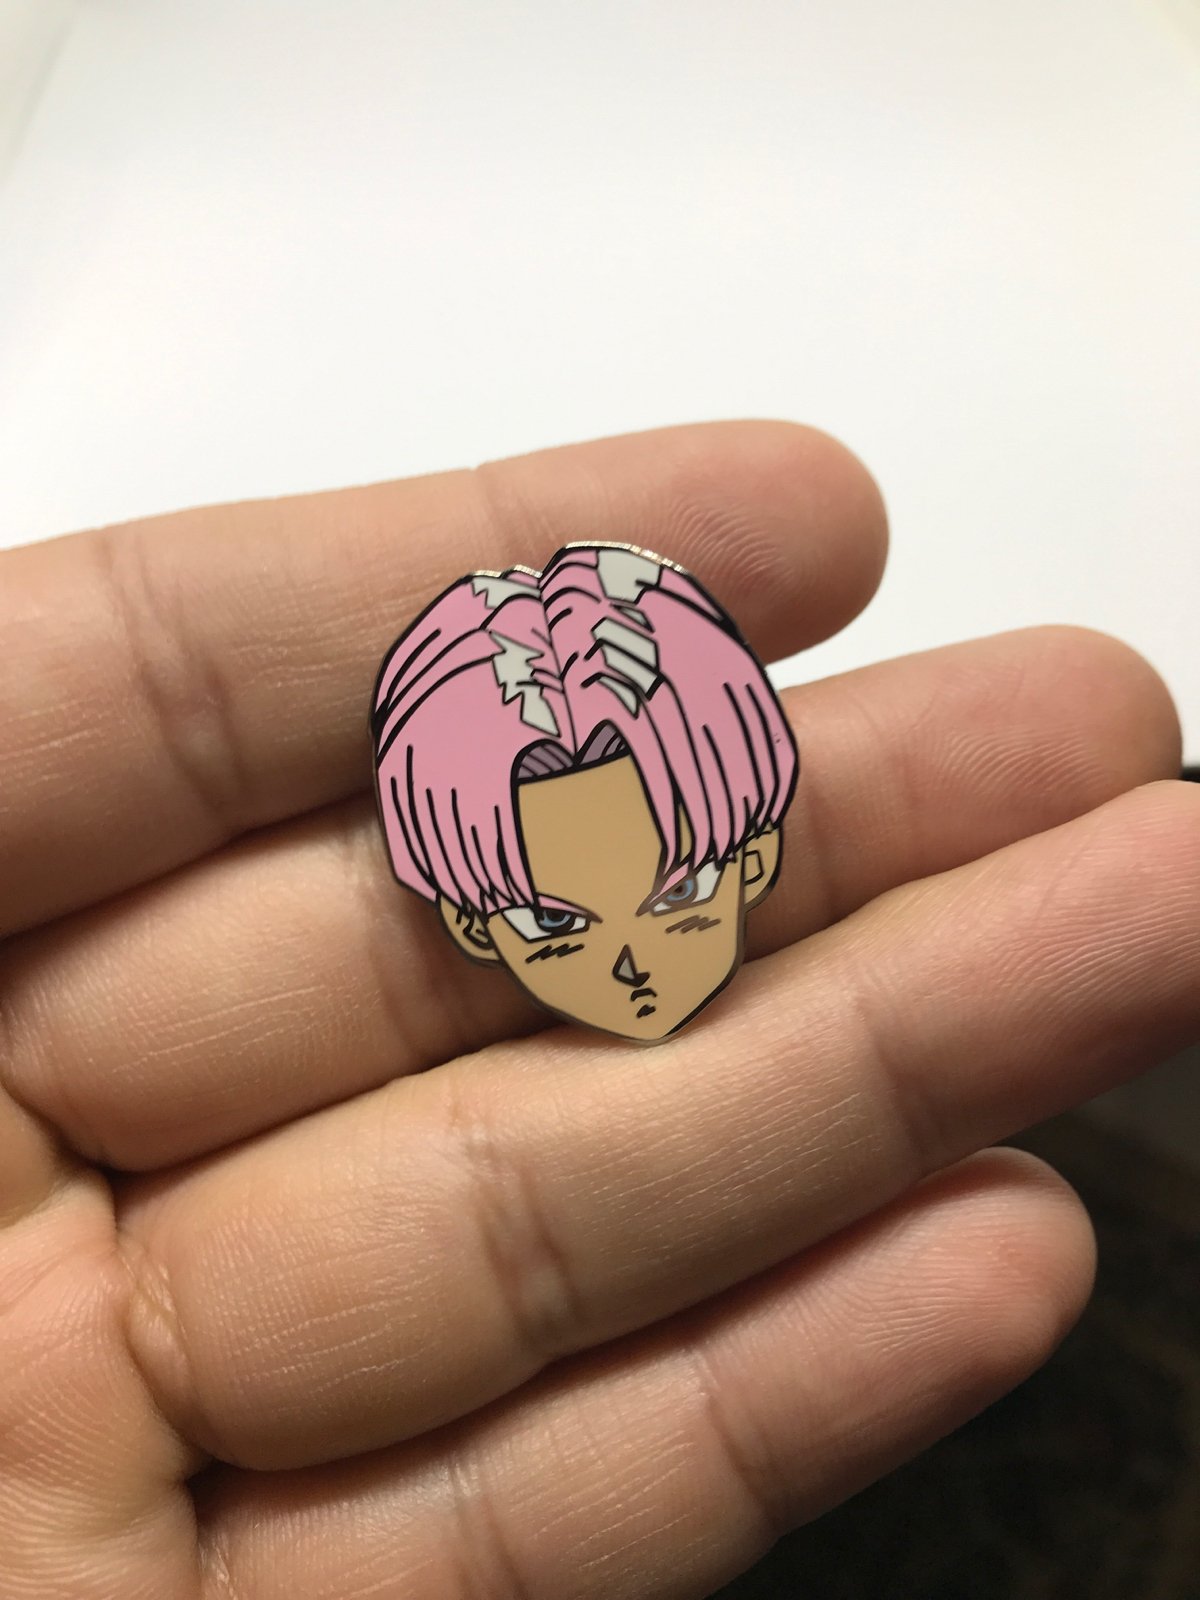 The Boy From the Future Hard Enamel Pin